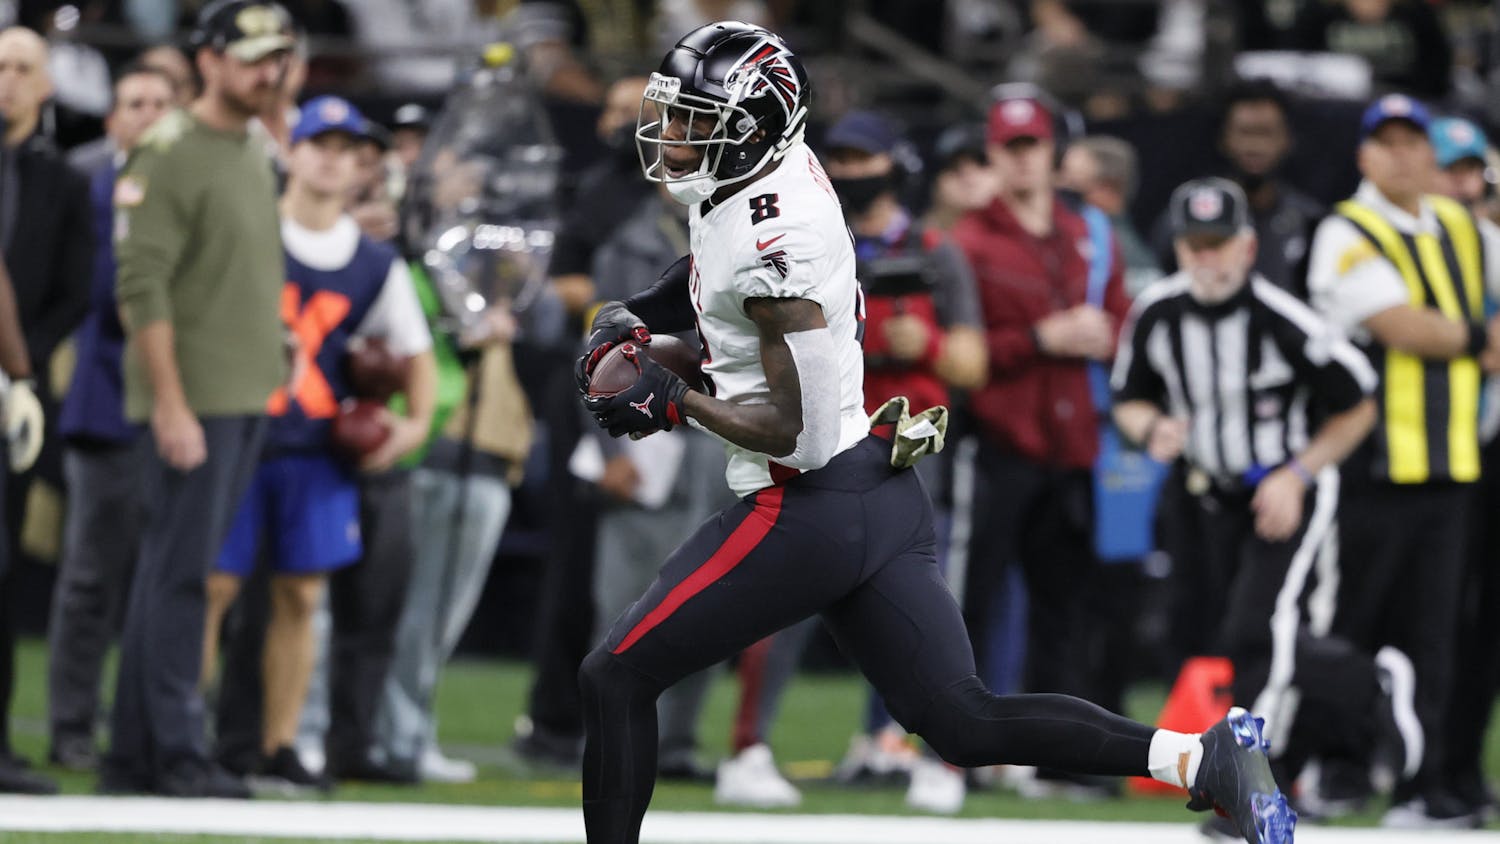 Atlanta Falcons tight end Kyle Pitts (8) runs against the New Orleans Saints during the first half of an NFL football game, Sunday, Nov. 7, 2021, in New Orleans. (AP Photo/Butch Dill)